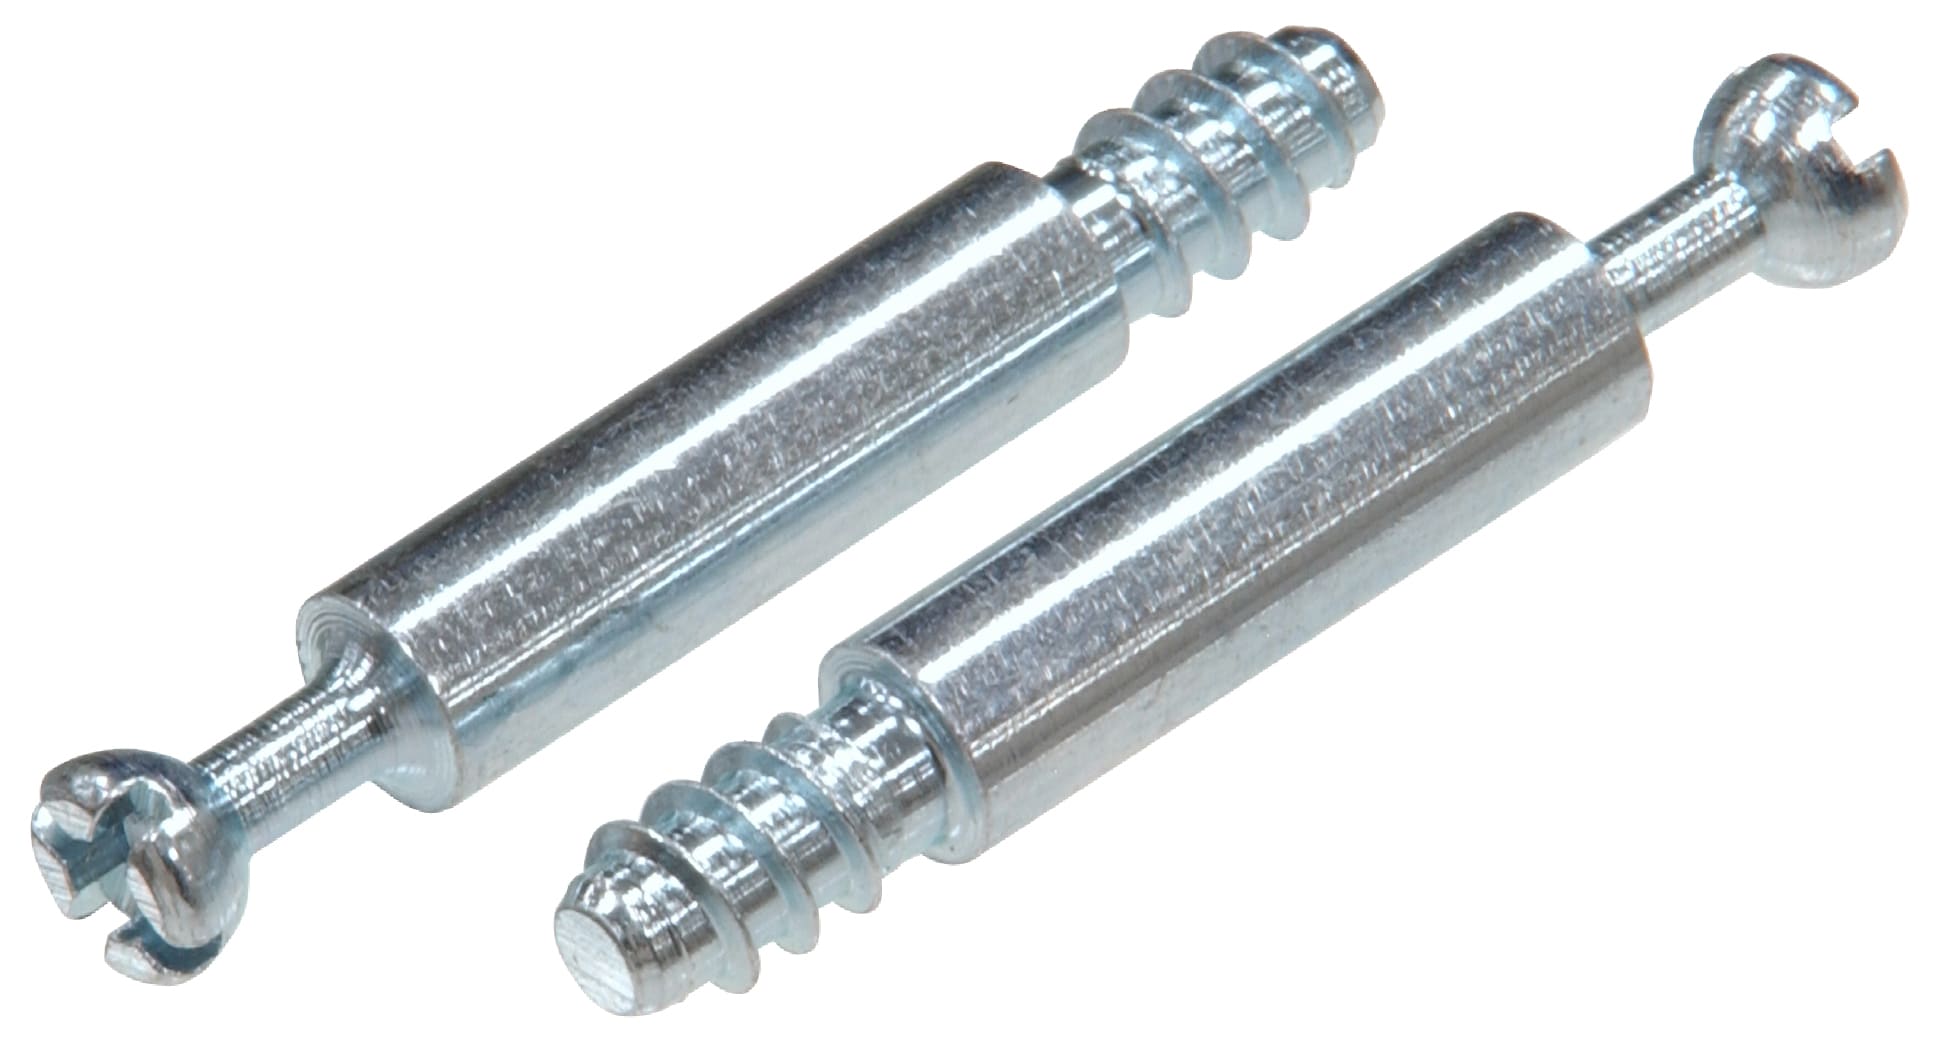 50mm In Quantities from 10-100 Binding Posts and Screws in sizes from 2mm 